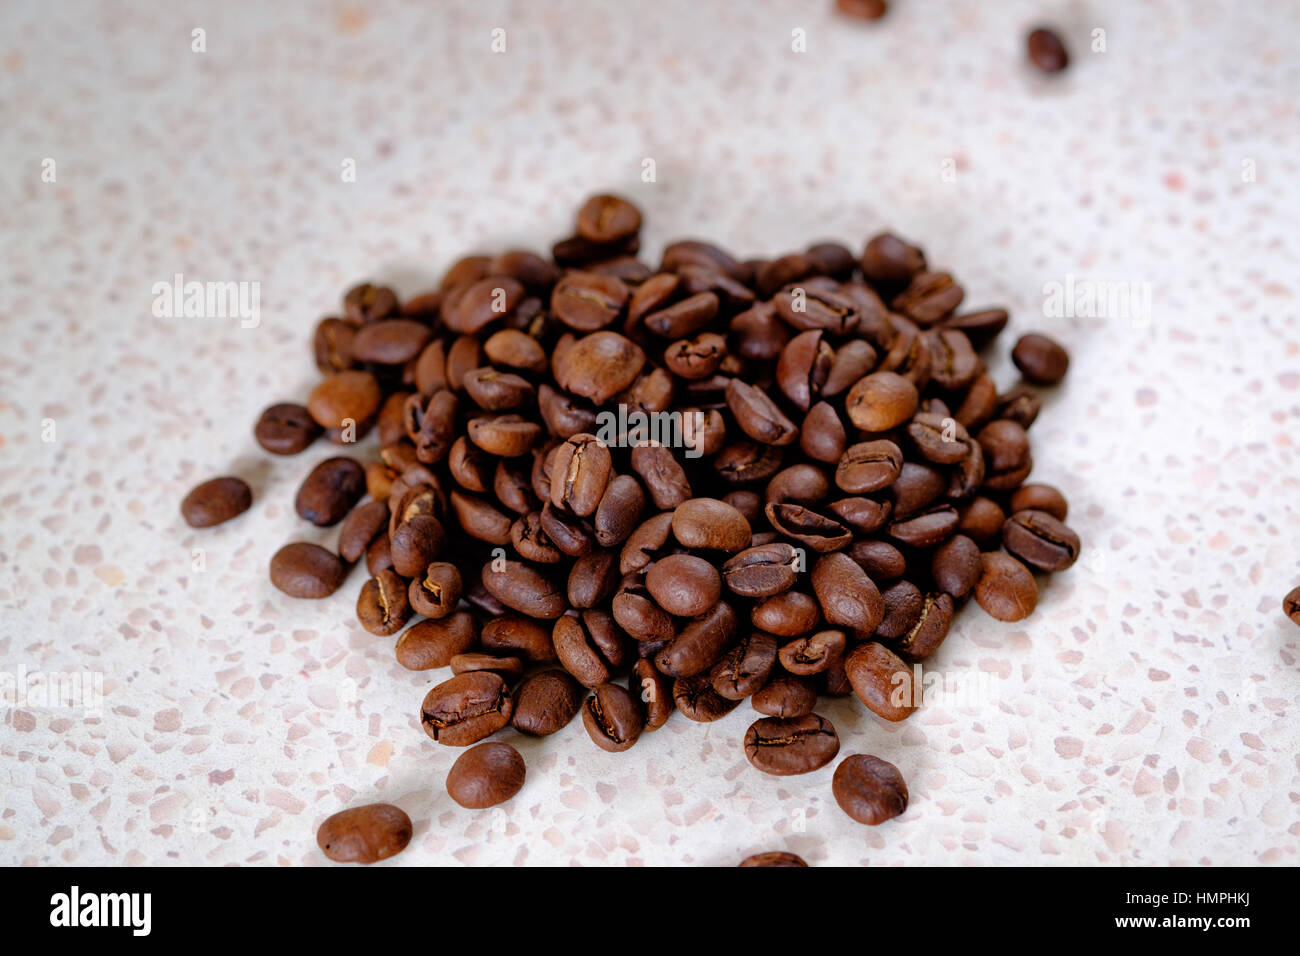 Small pile of roasted coffee beans on a flecked counter top Stock Photo